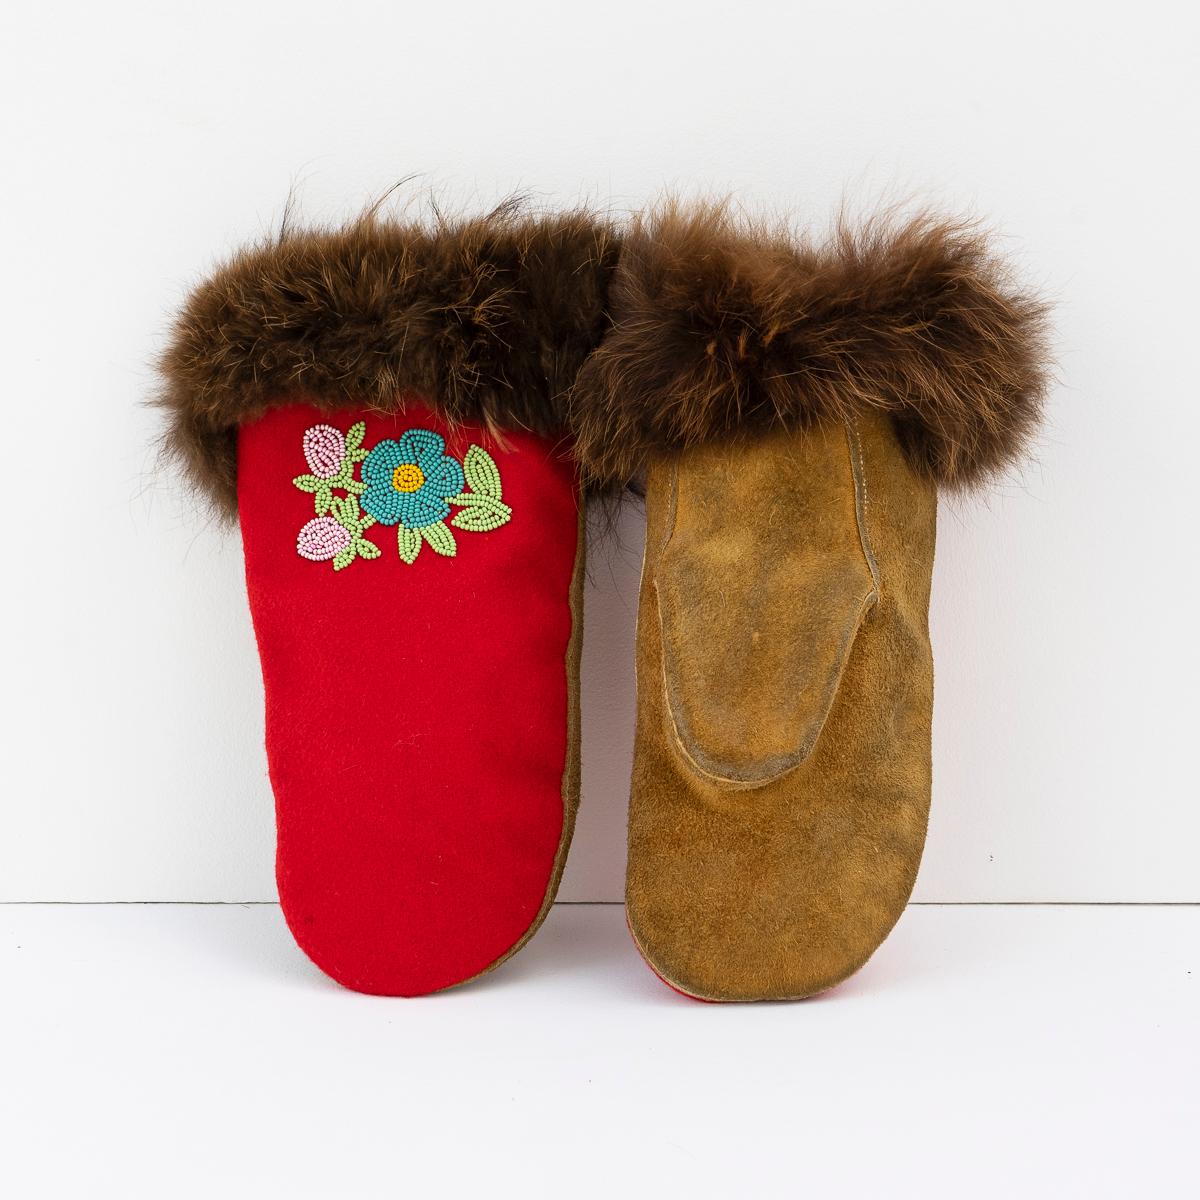 Canadian Vintage Ojibwe Beaded Felt and Moose Skin Gauntlet Mittens, 1950s First Nations For Sale